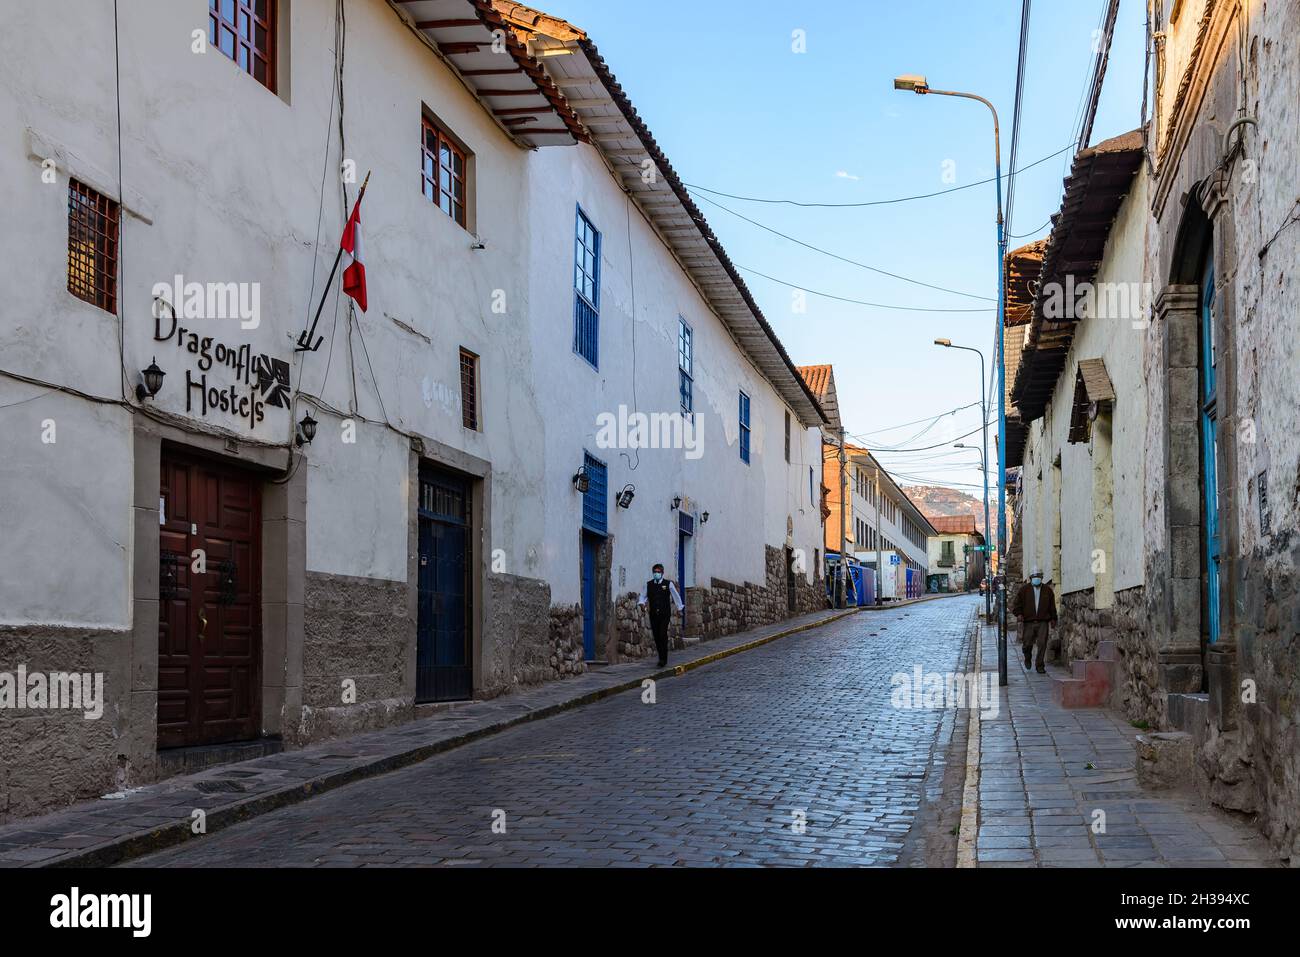 Narrow and cobble stone paved street of historic old town Cuzco, Peru. Stock Photo